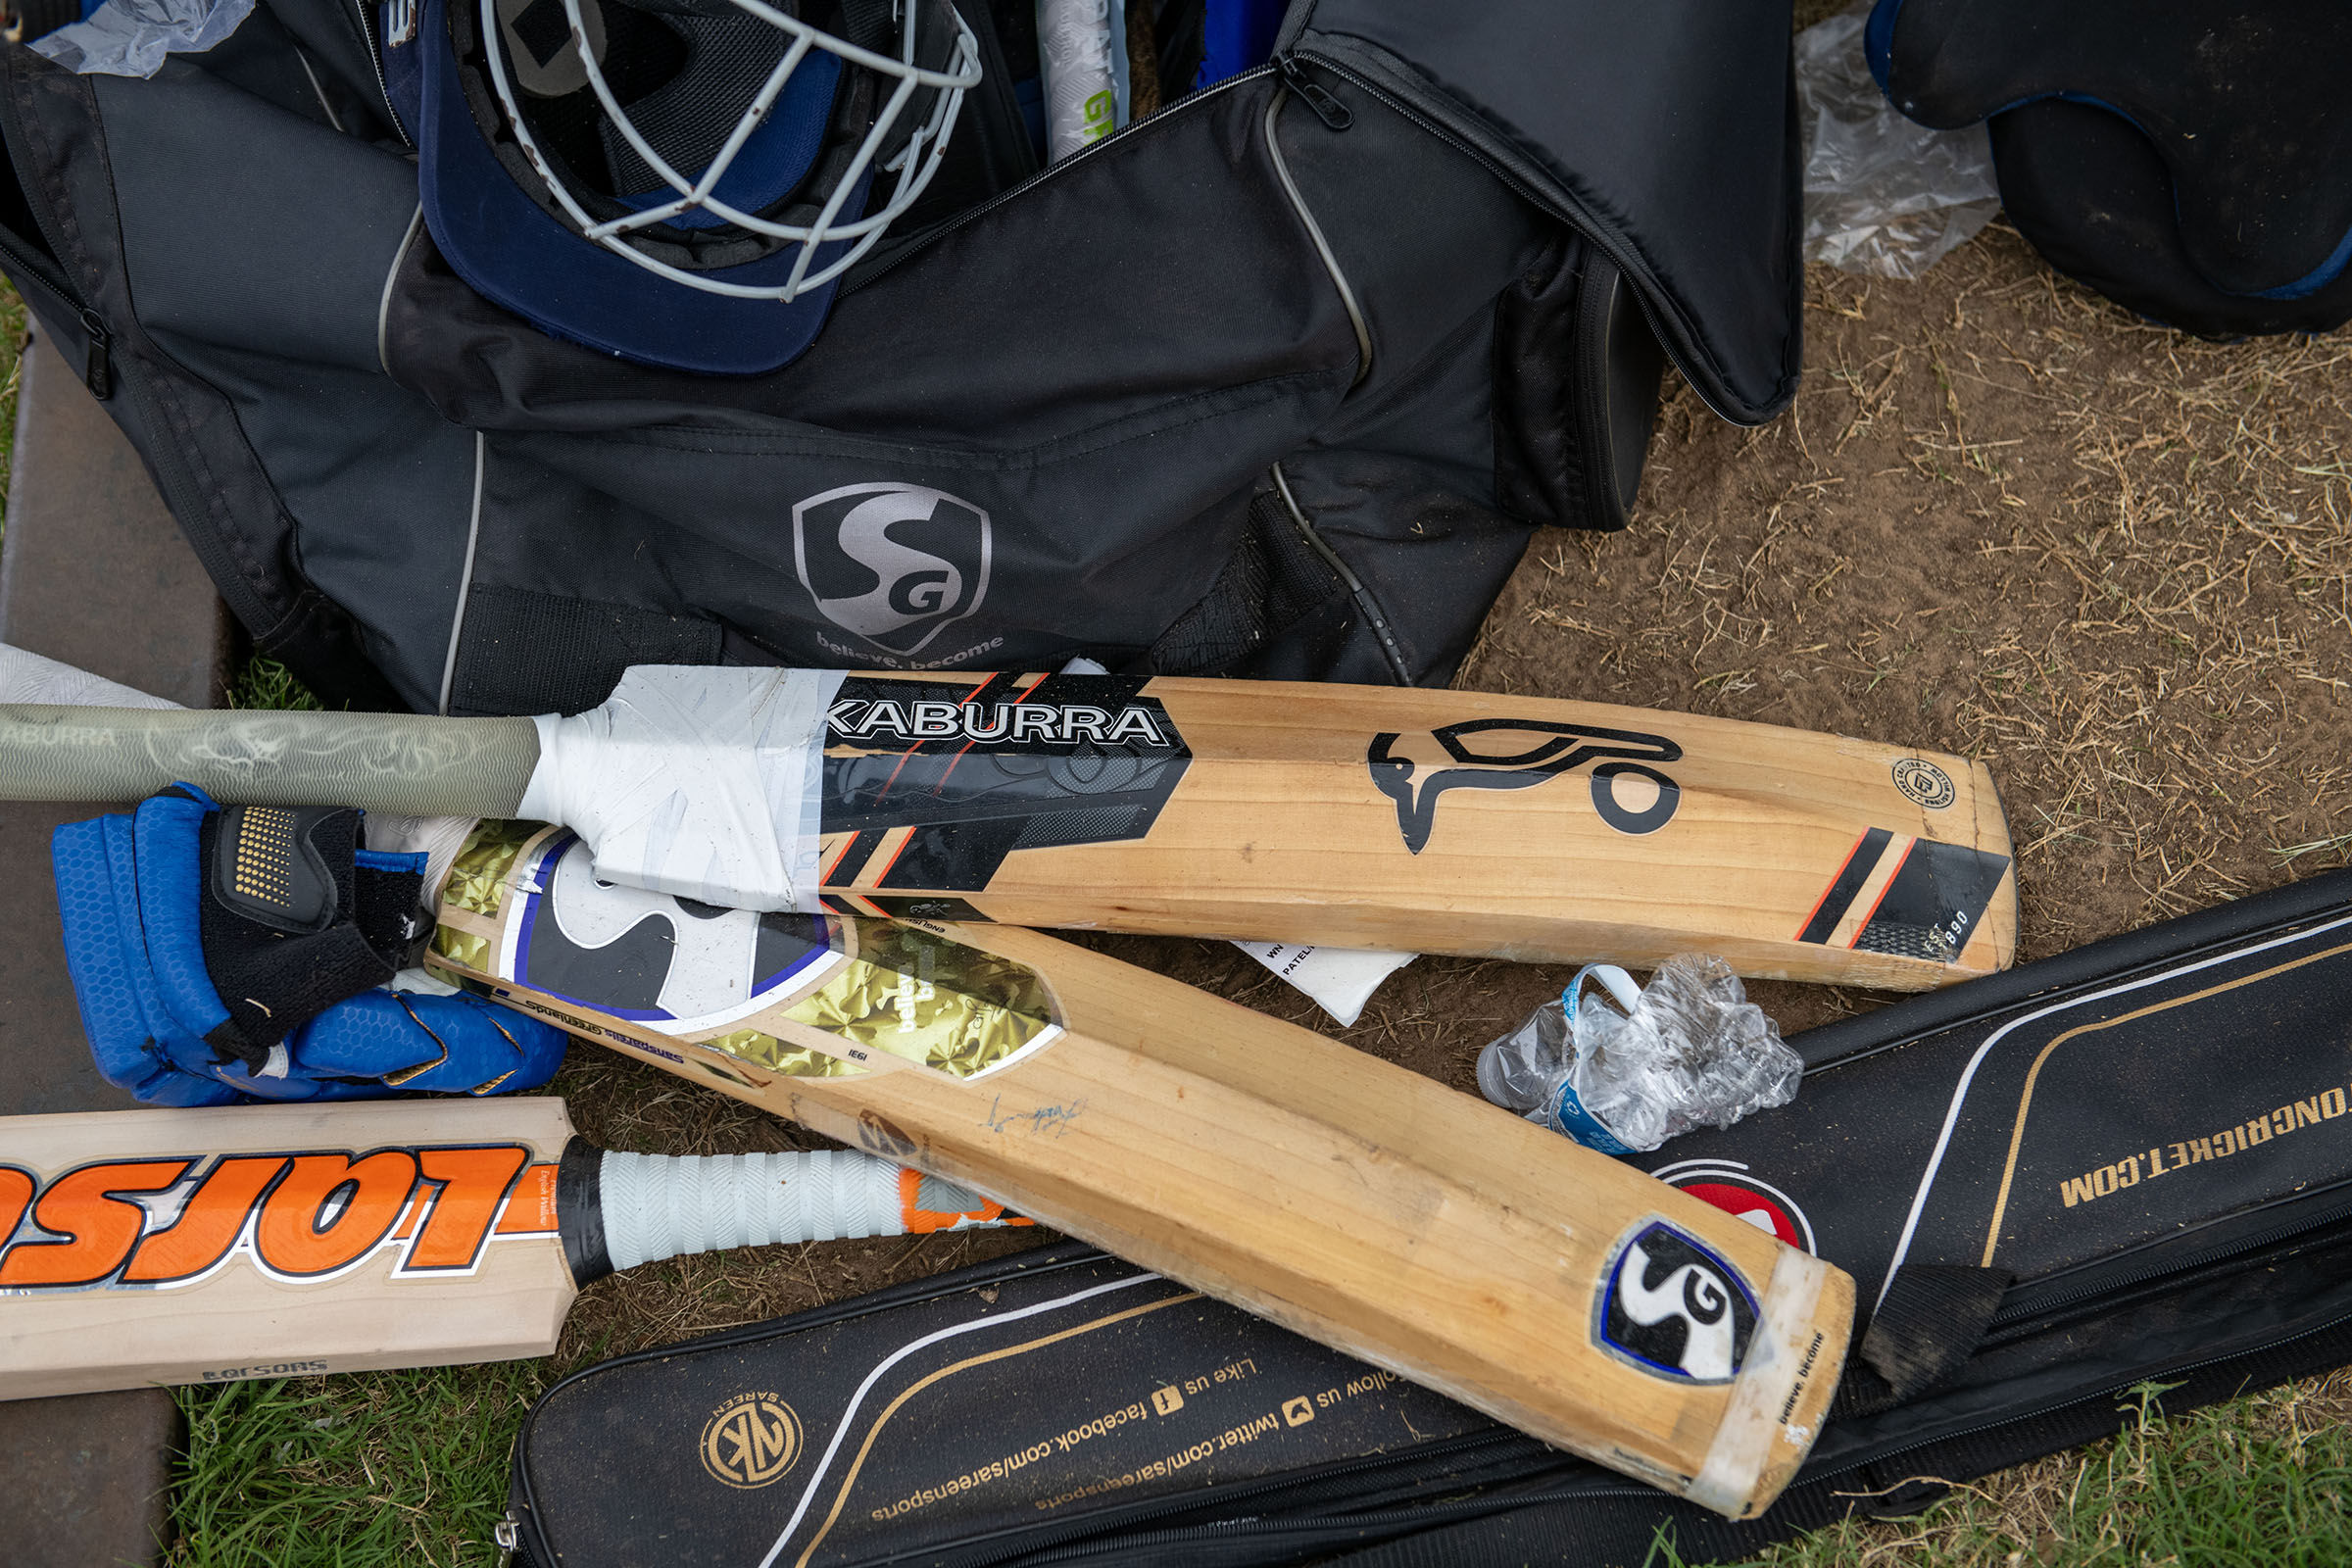 A pile of cricket equipment, including two bats